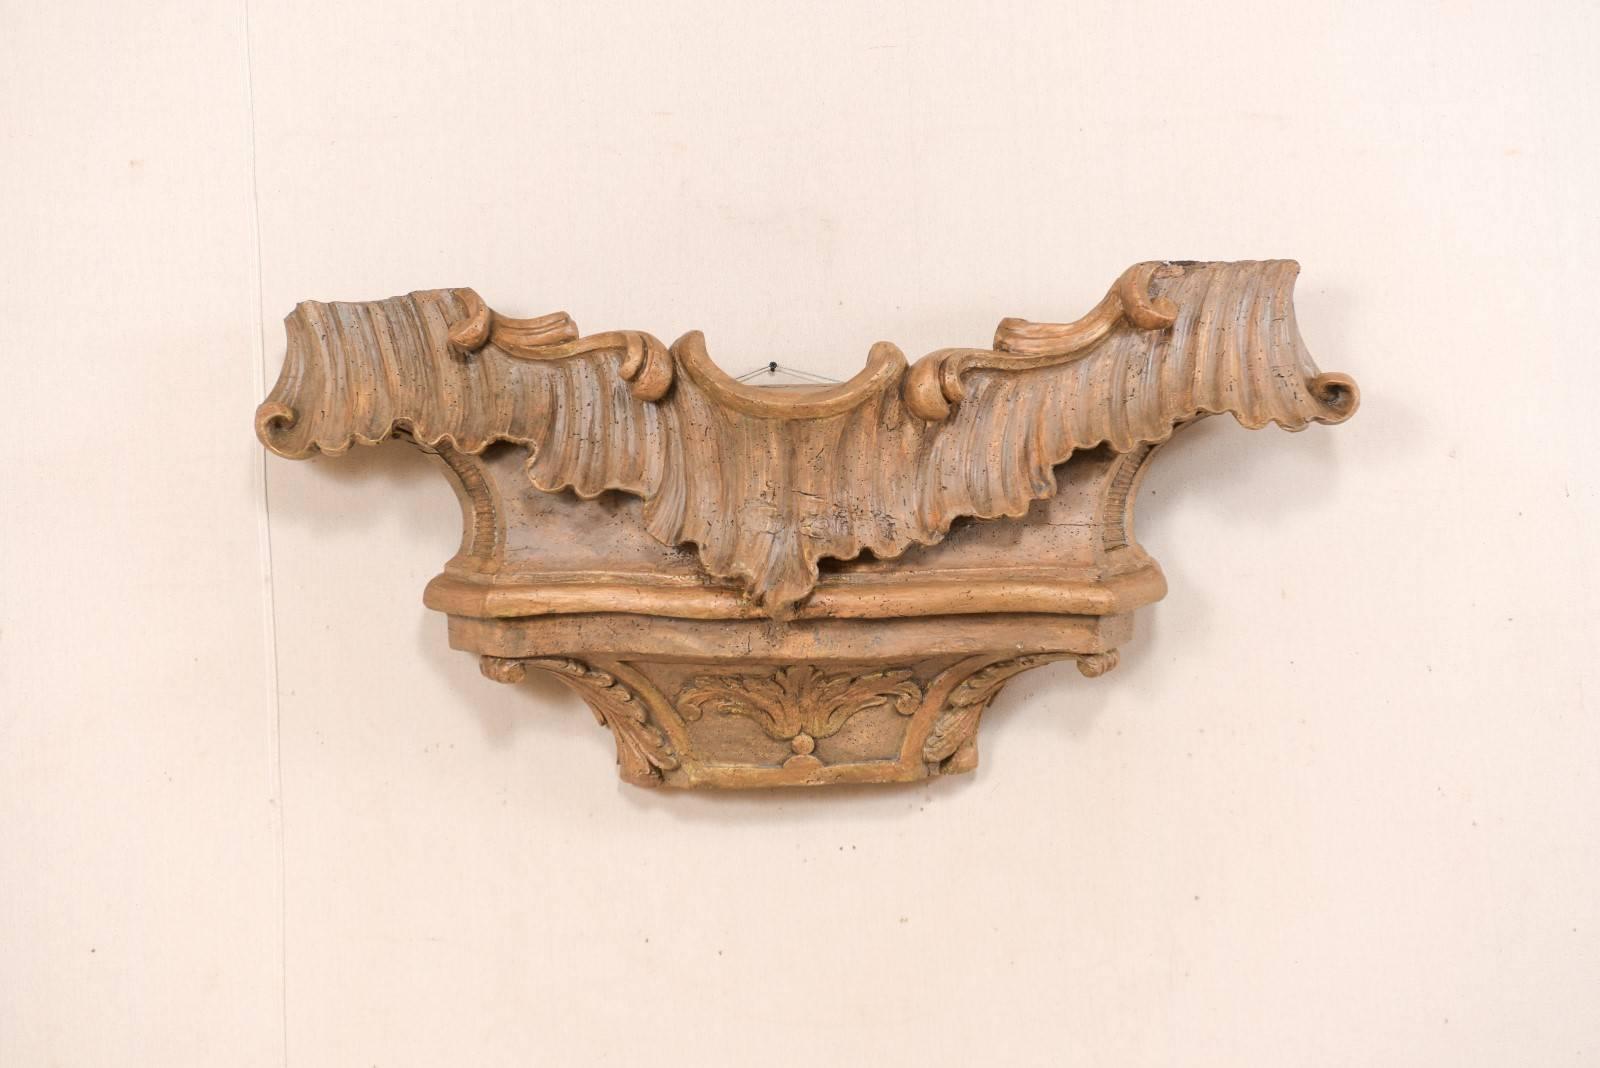 An Italian 18th century wood carved wood wall plaque fragment. This antique Italian wall decoration has a drawn out rectangular shape which is heavily carved in a scroll and acanthus leave motif. The top of the plaque is wider, with a shapely dip at